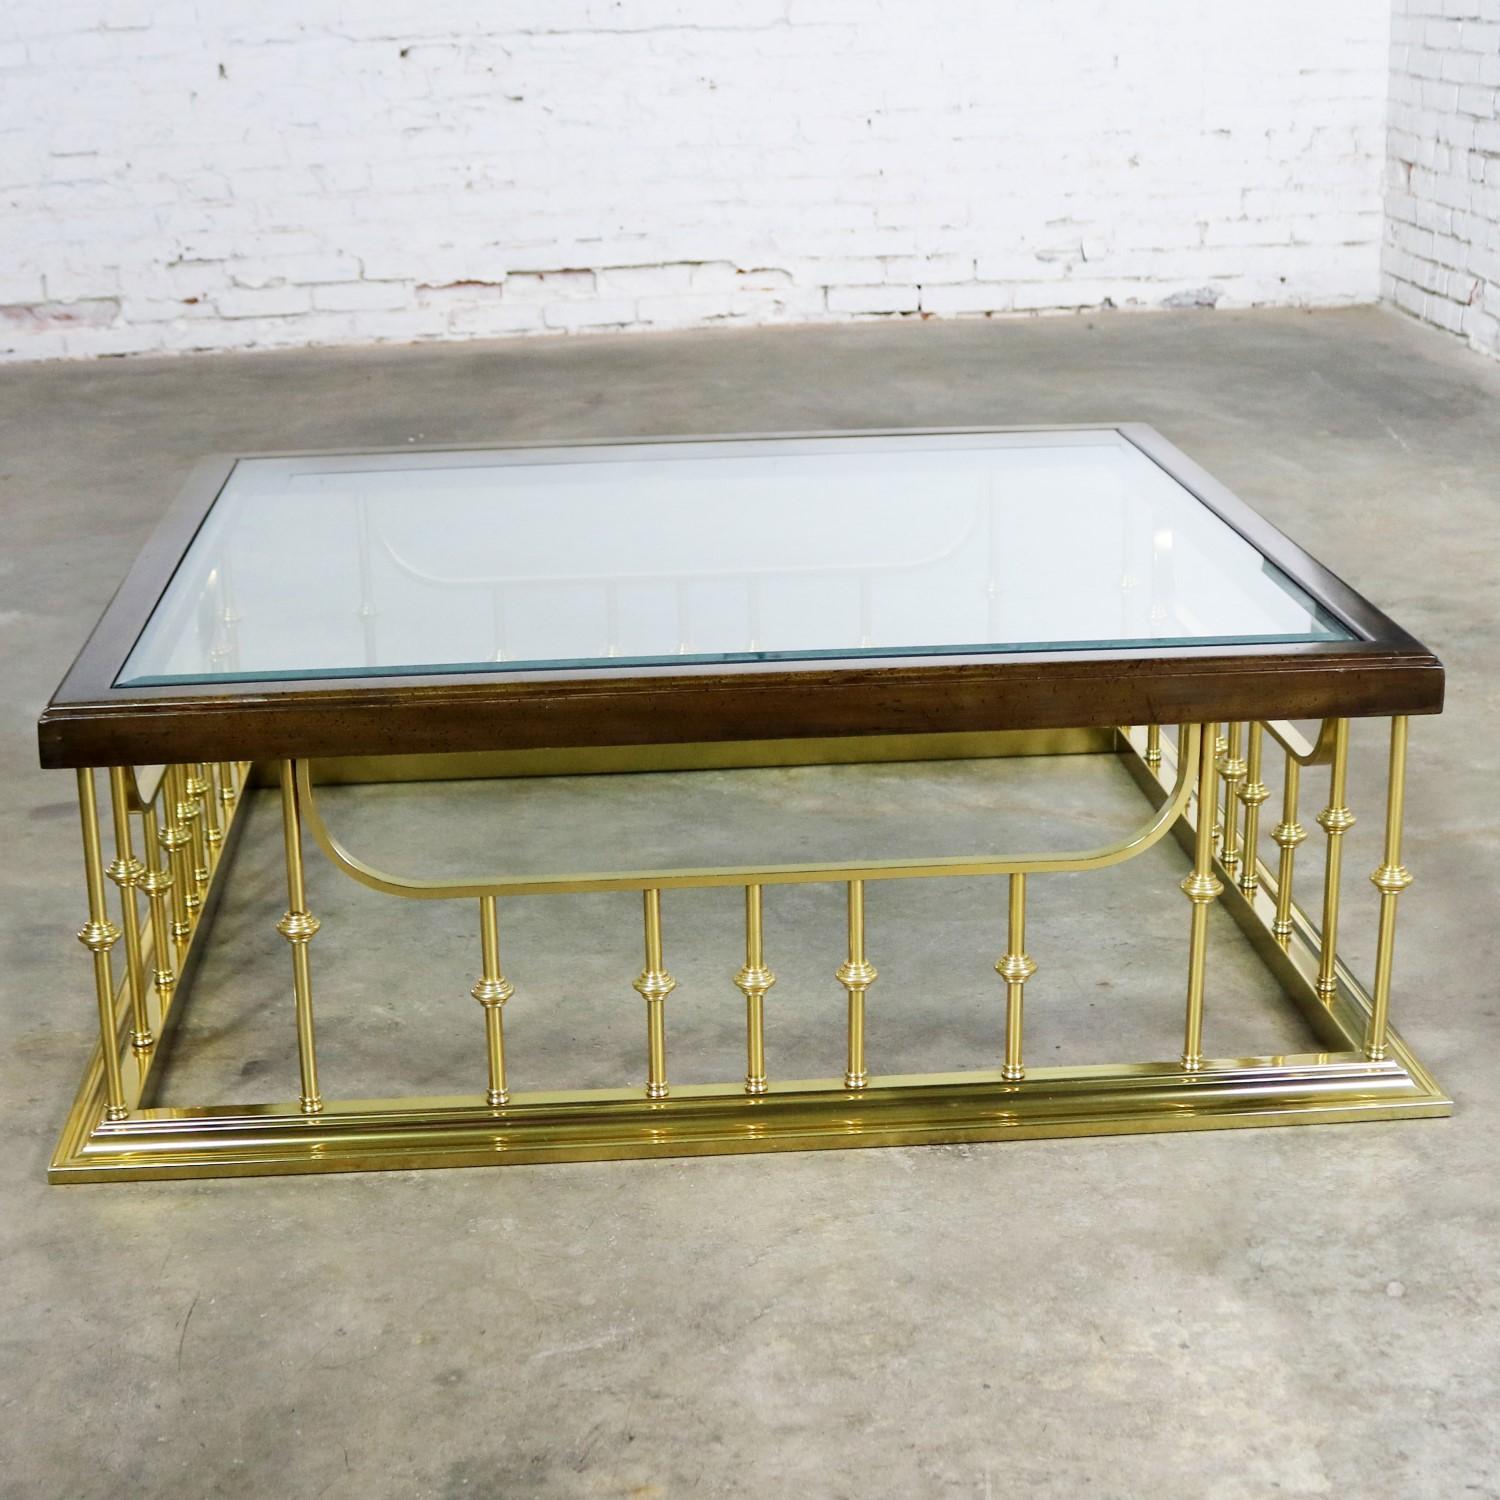 Campaign Brass Glass Wood Fireplace Fender Style Erwin Lambeth Large Square Coffee Table